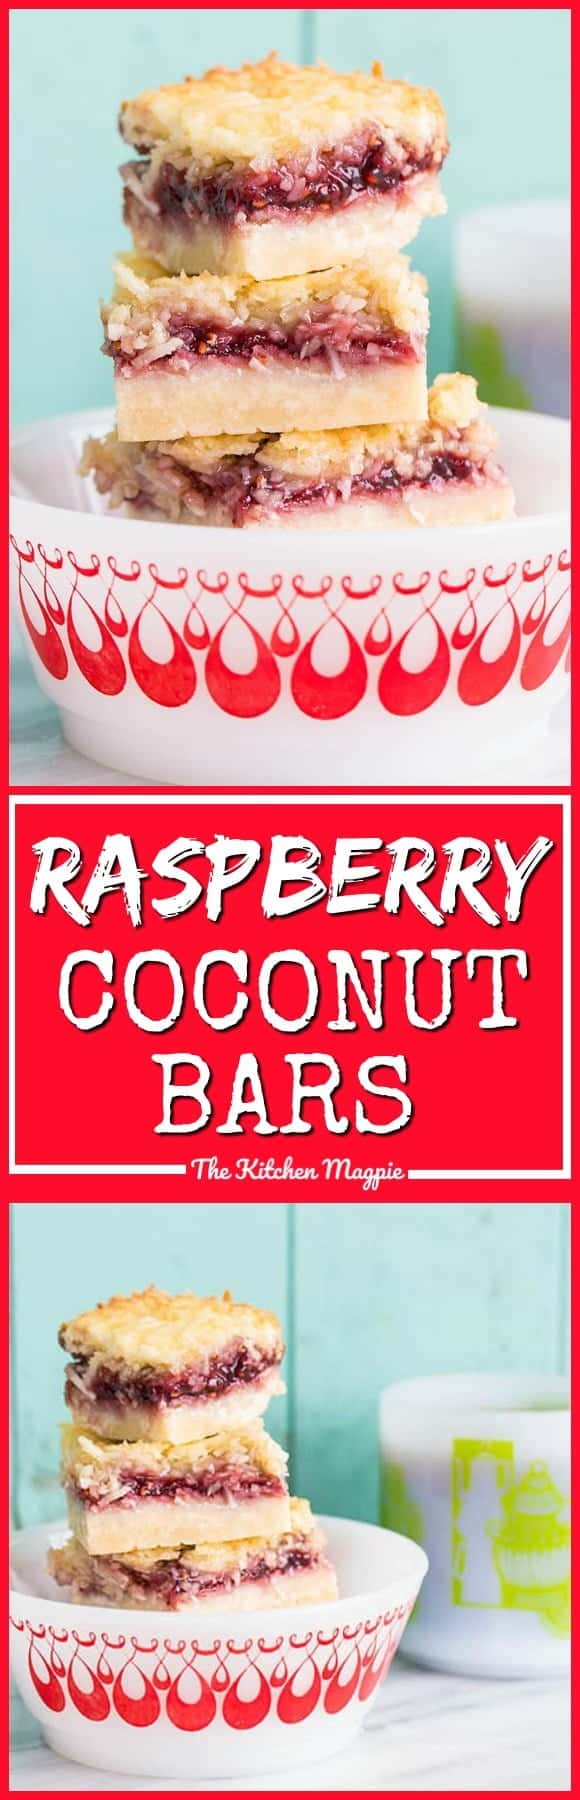 Raspberry Coconut Bars, the perfect bar recipe! It freezes well and tastes amazing! Recipe from @kitchenmagpie #dessert #christmas #coconut #recipe